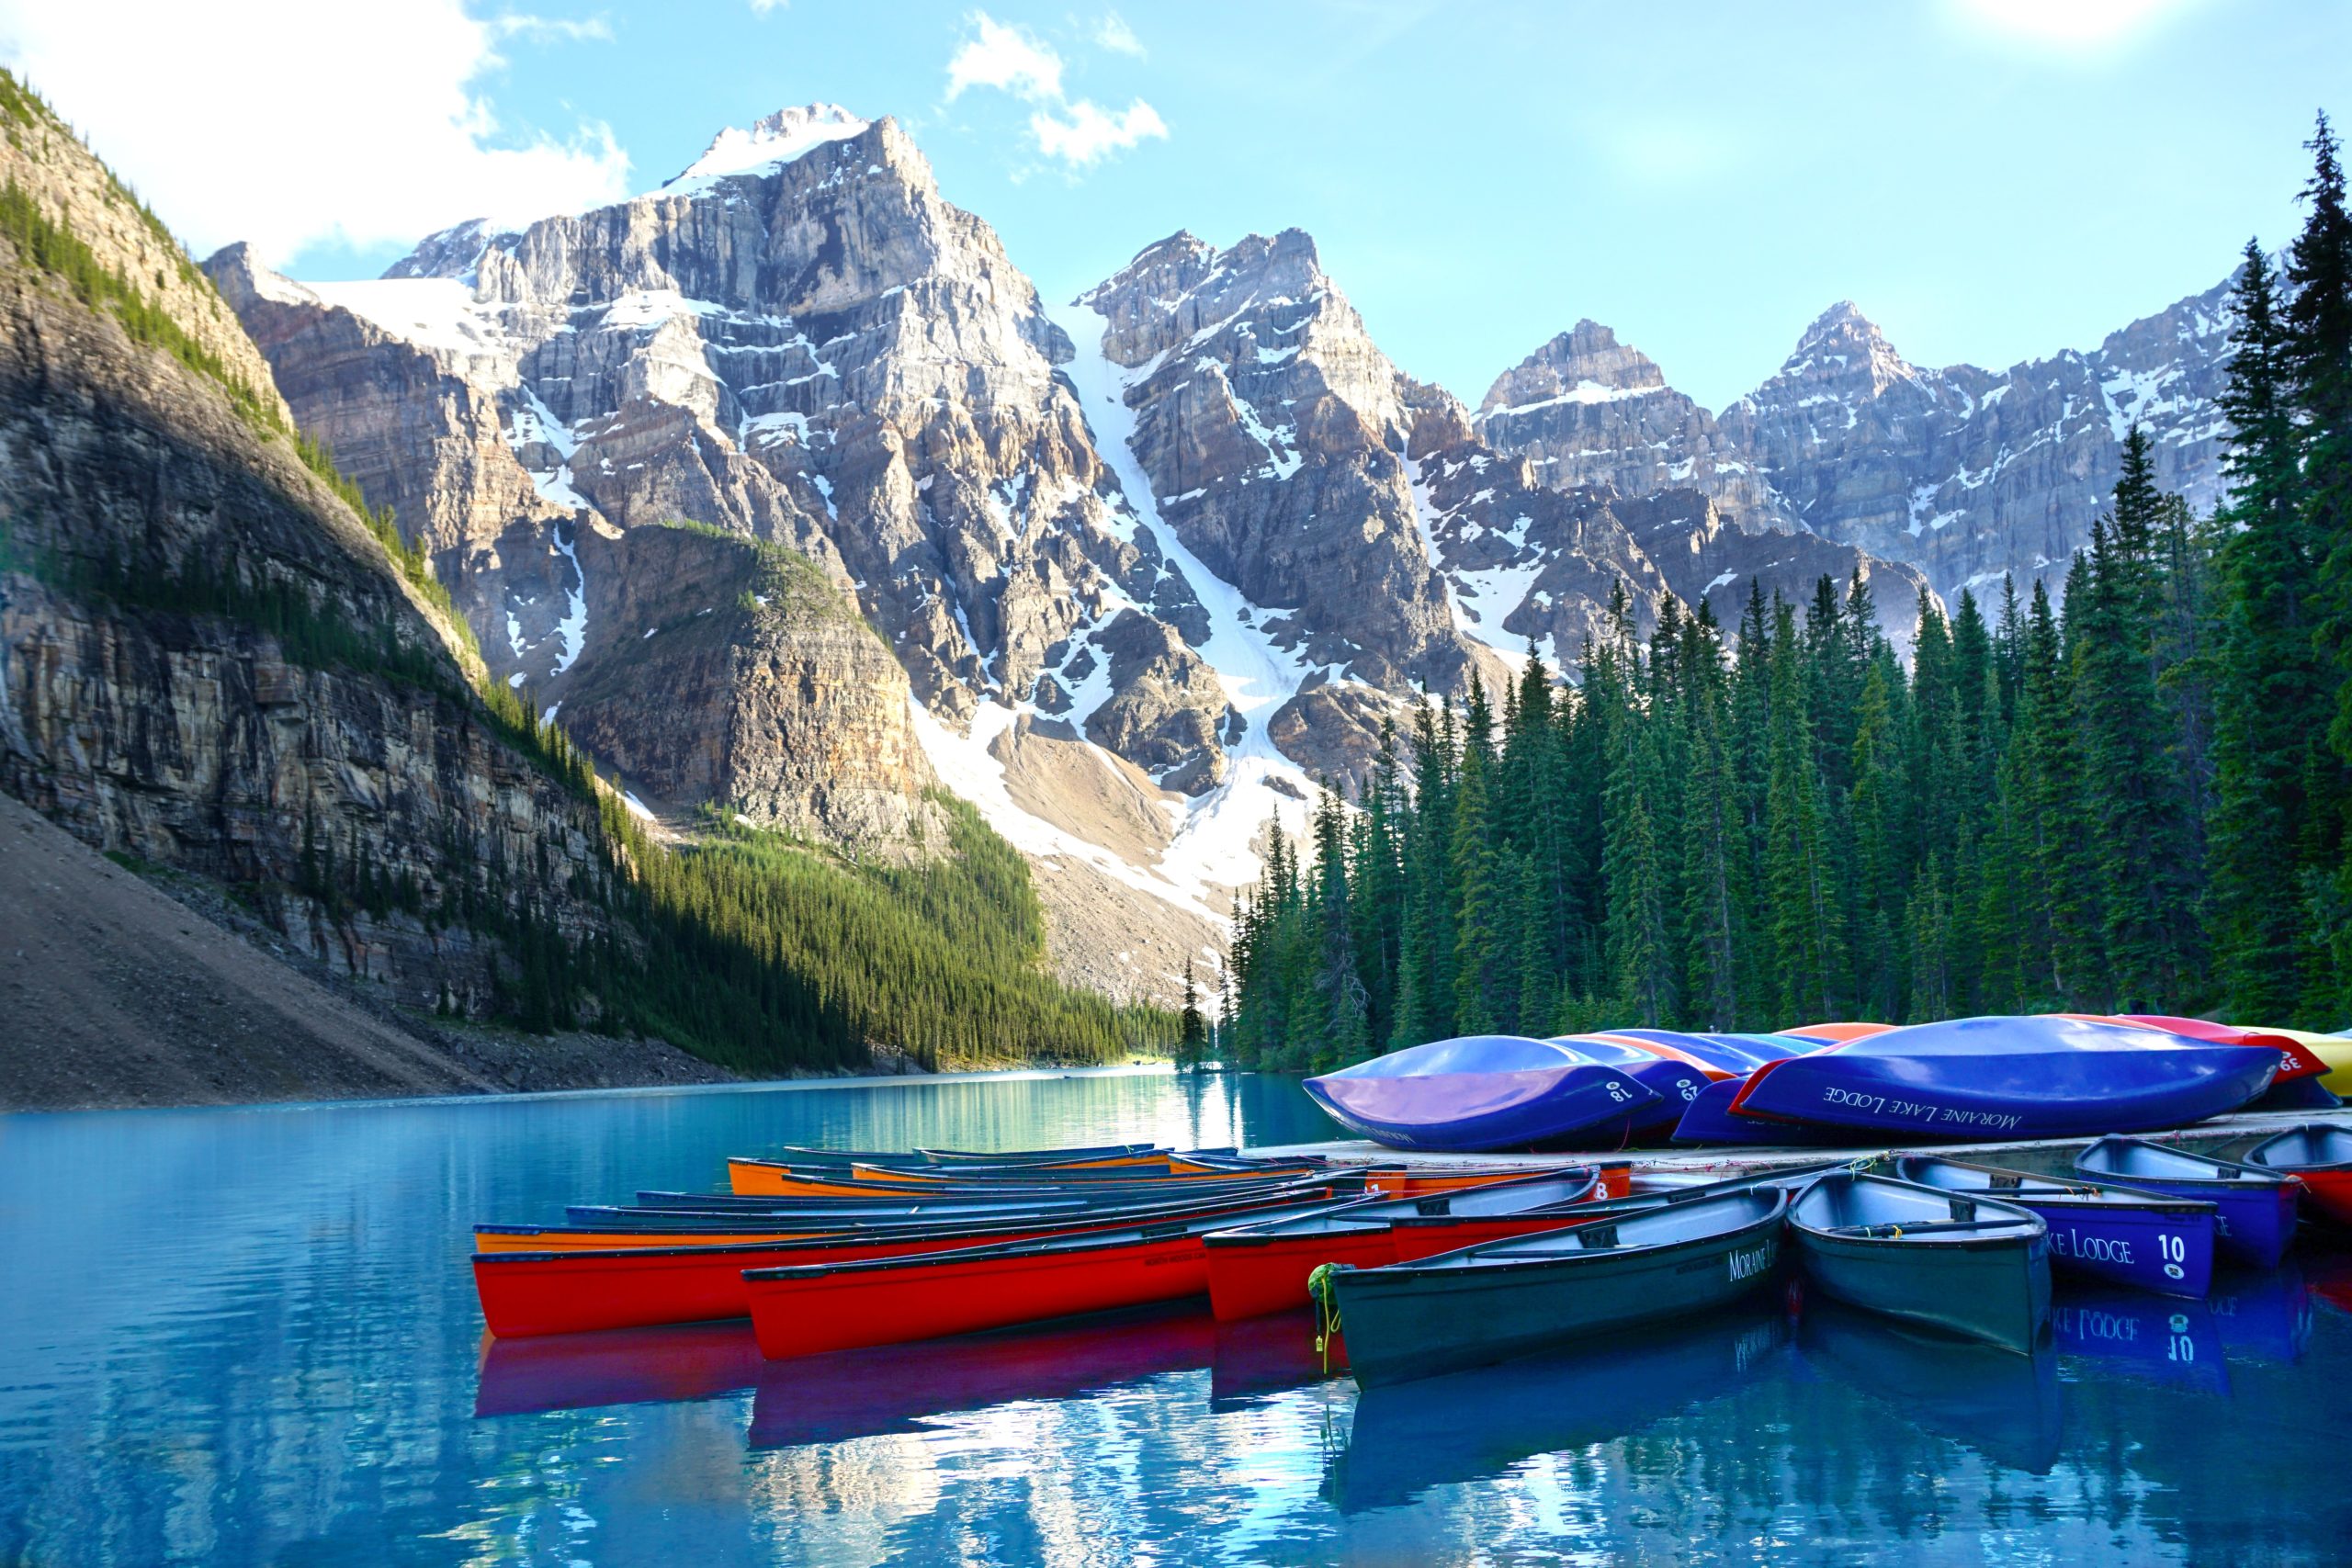 Canoes floating on a pristine blue lake with towering mountains and trees in the background.